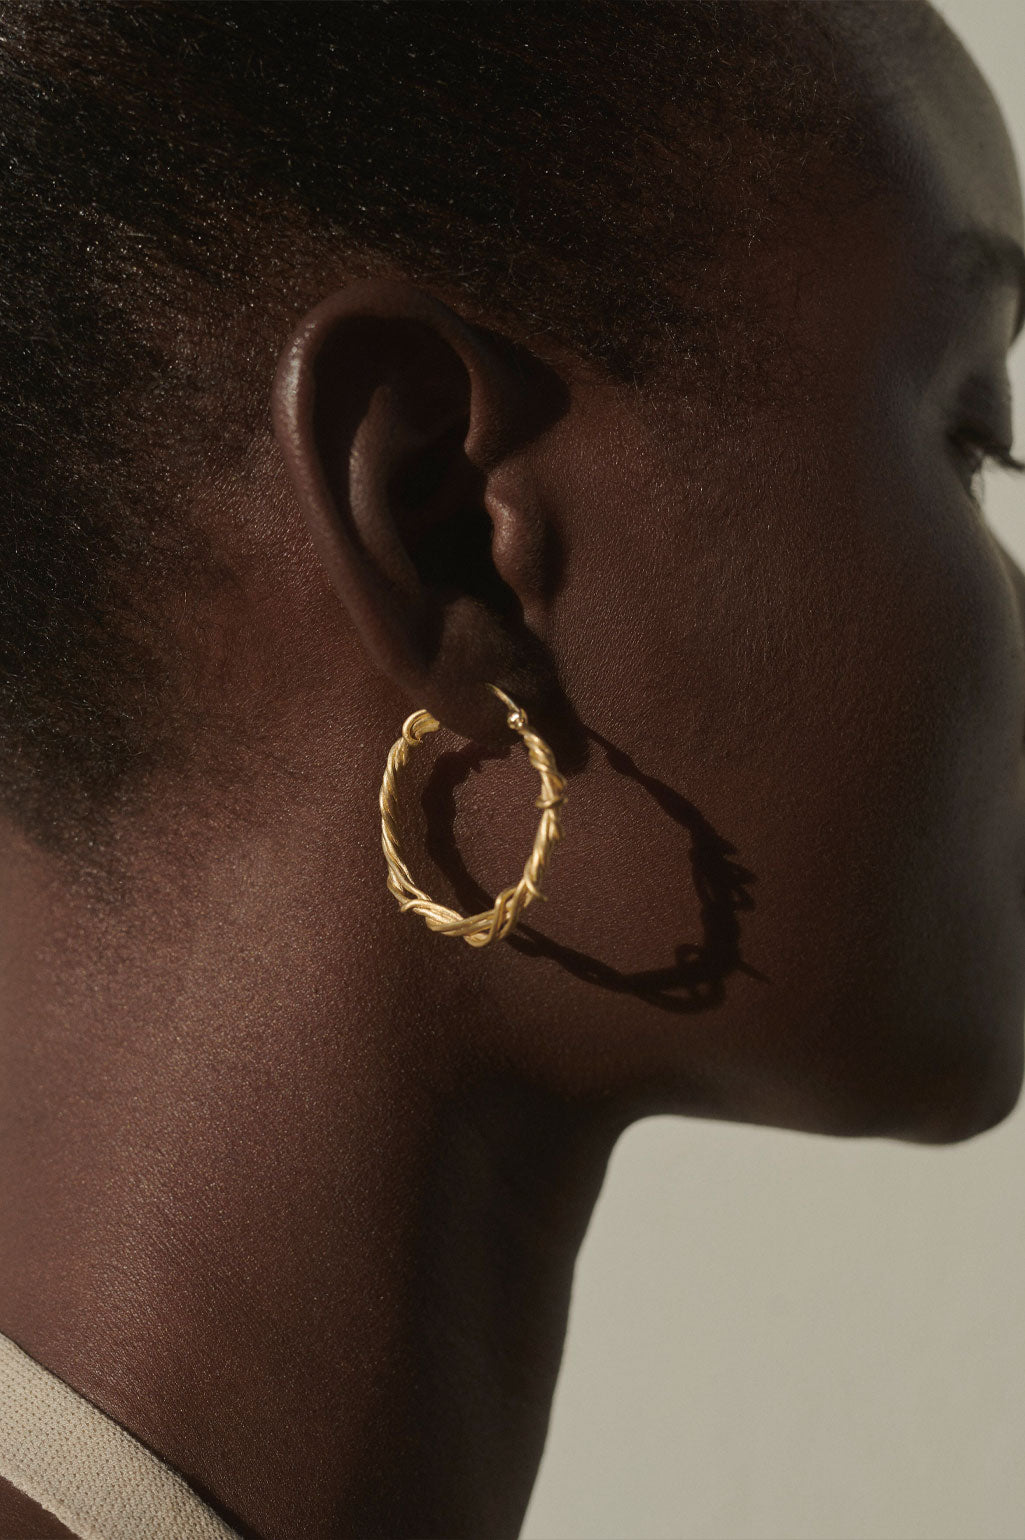 The Chance Encounter - Gold Vermeil Earrings | Completedworks